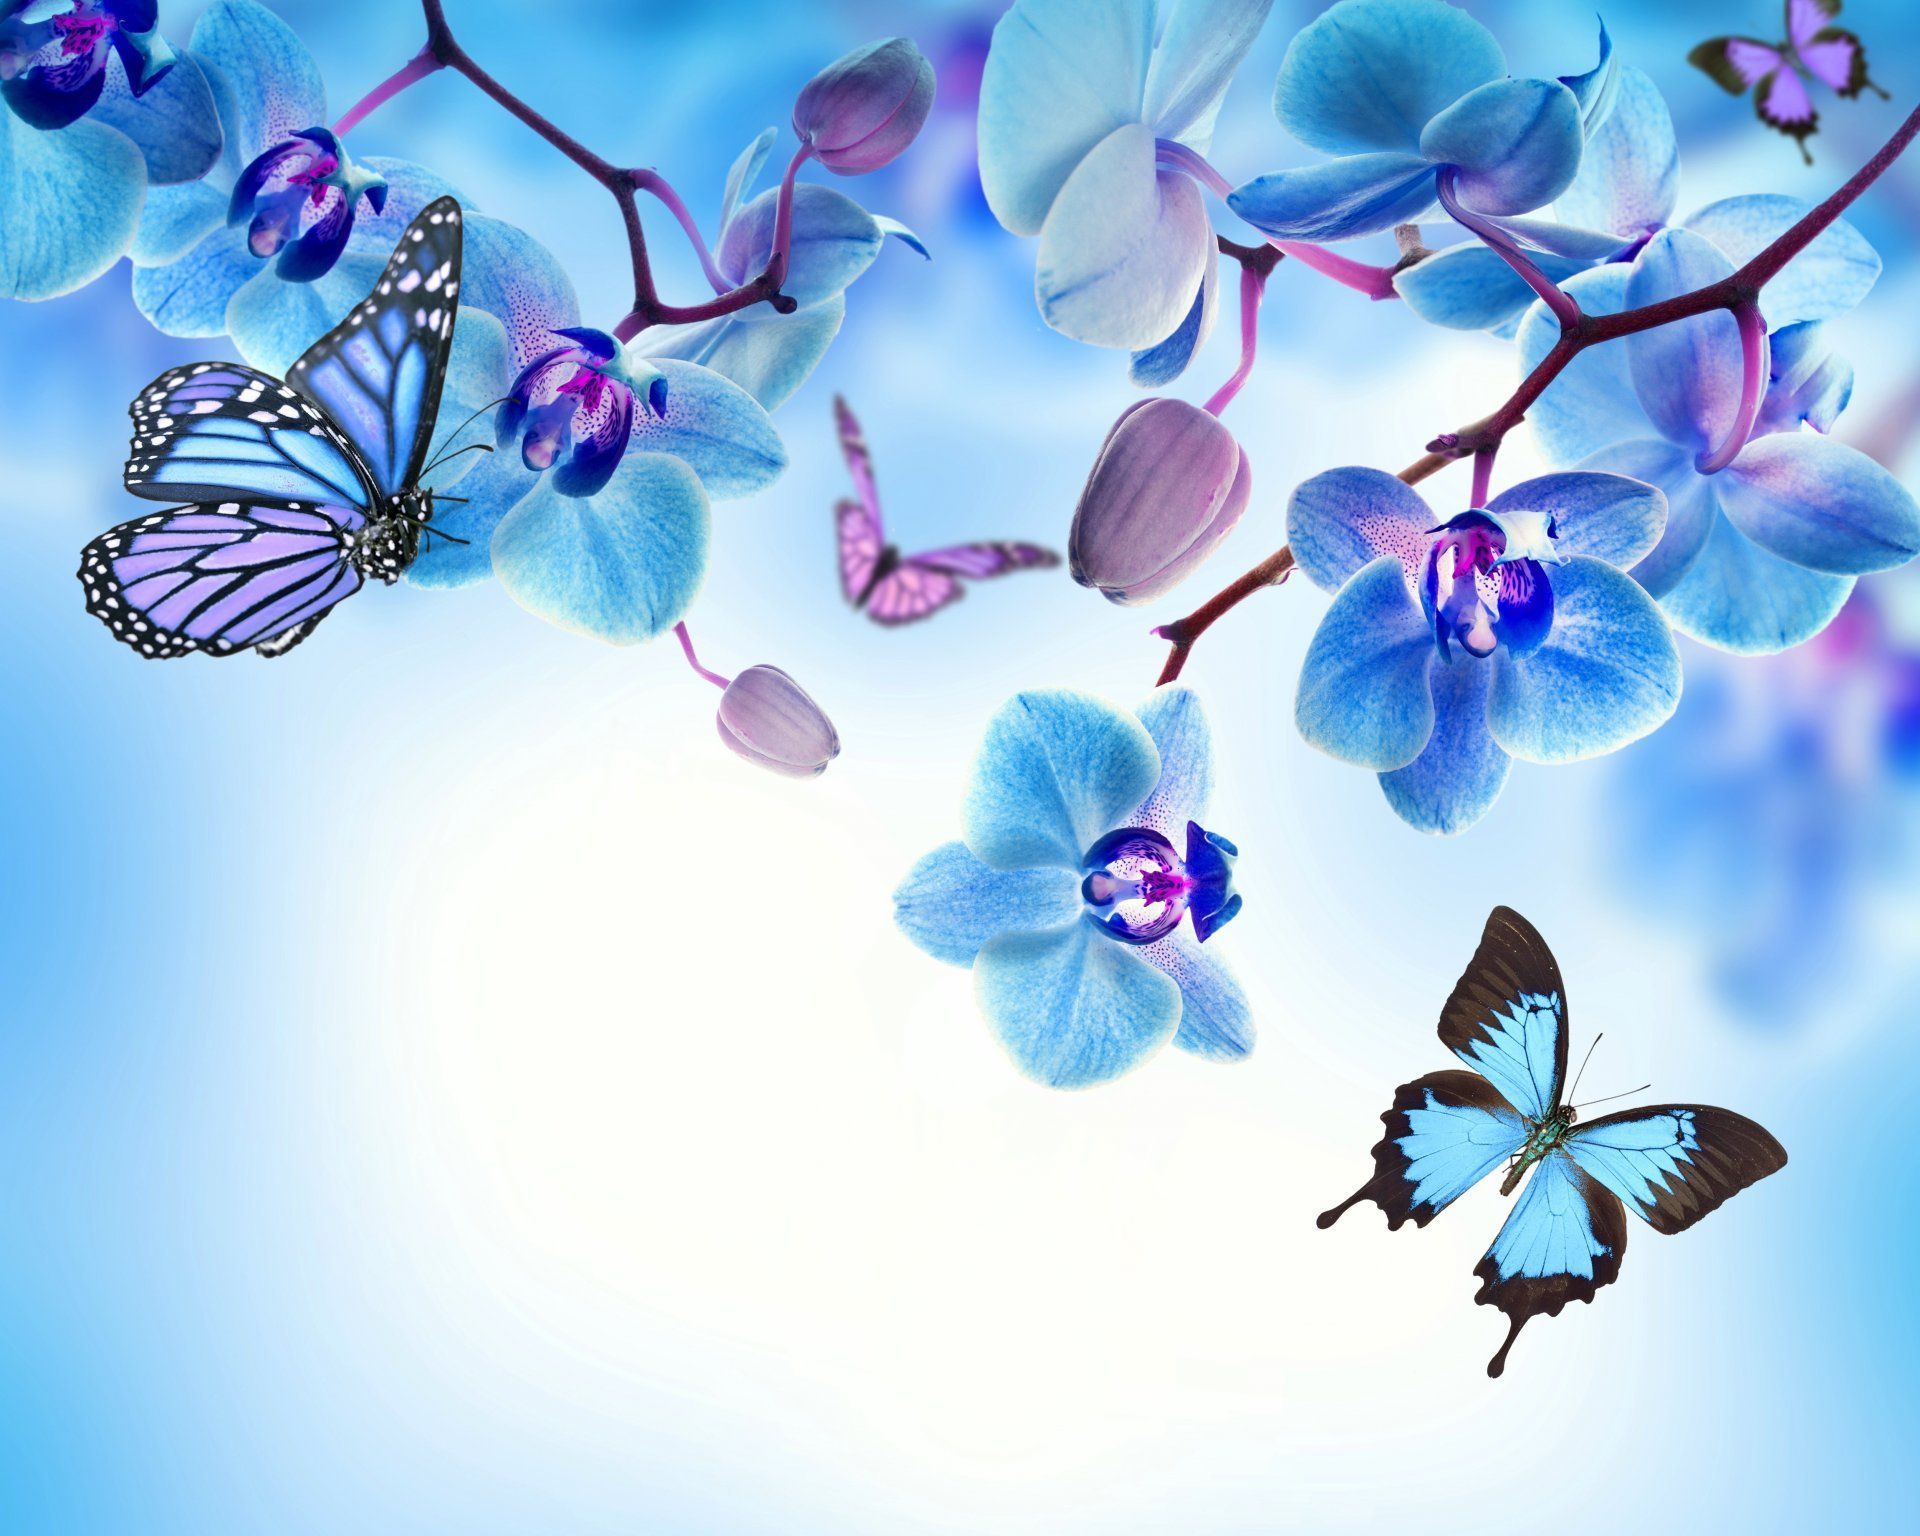 Blue Flower and Butterfly Wallpaper Free Blue Flower and Butterfly Background